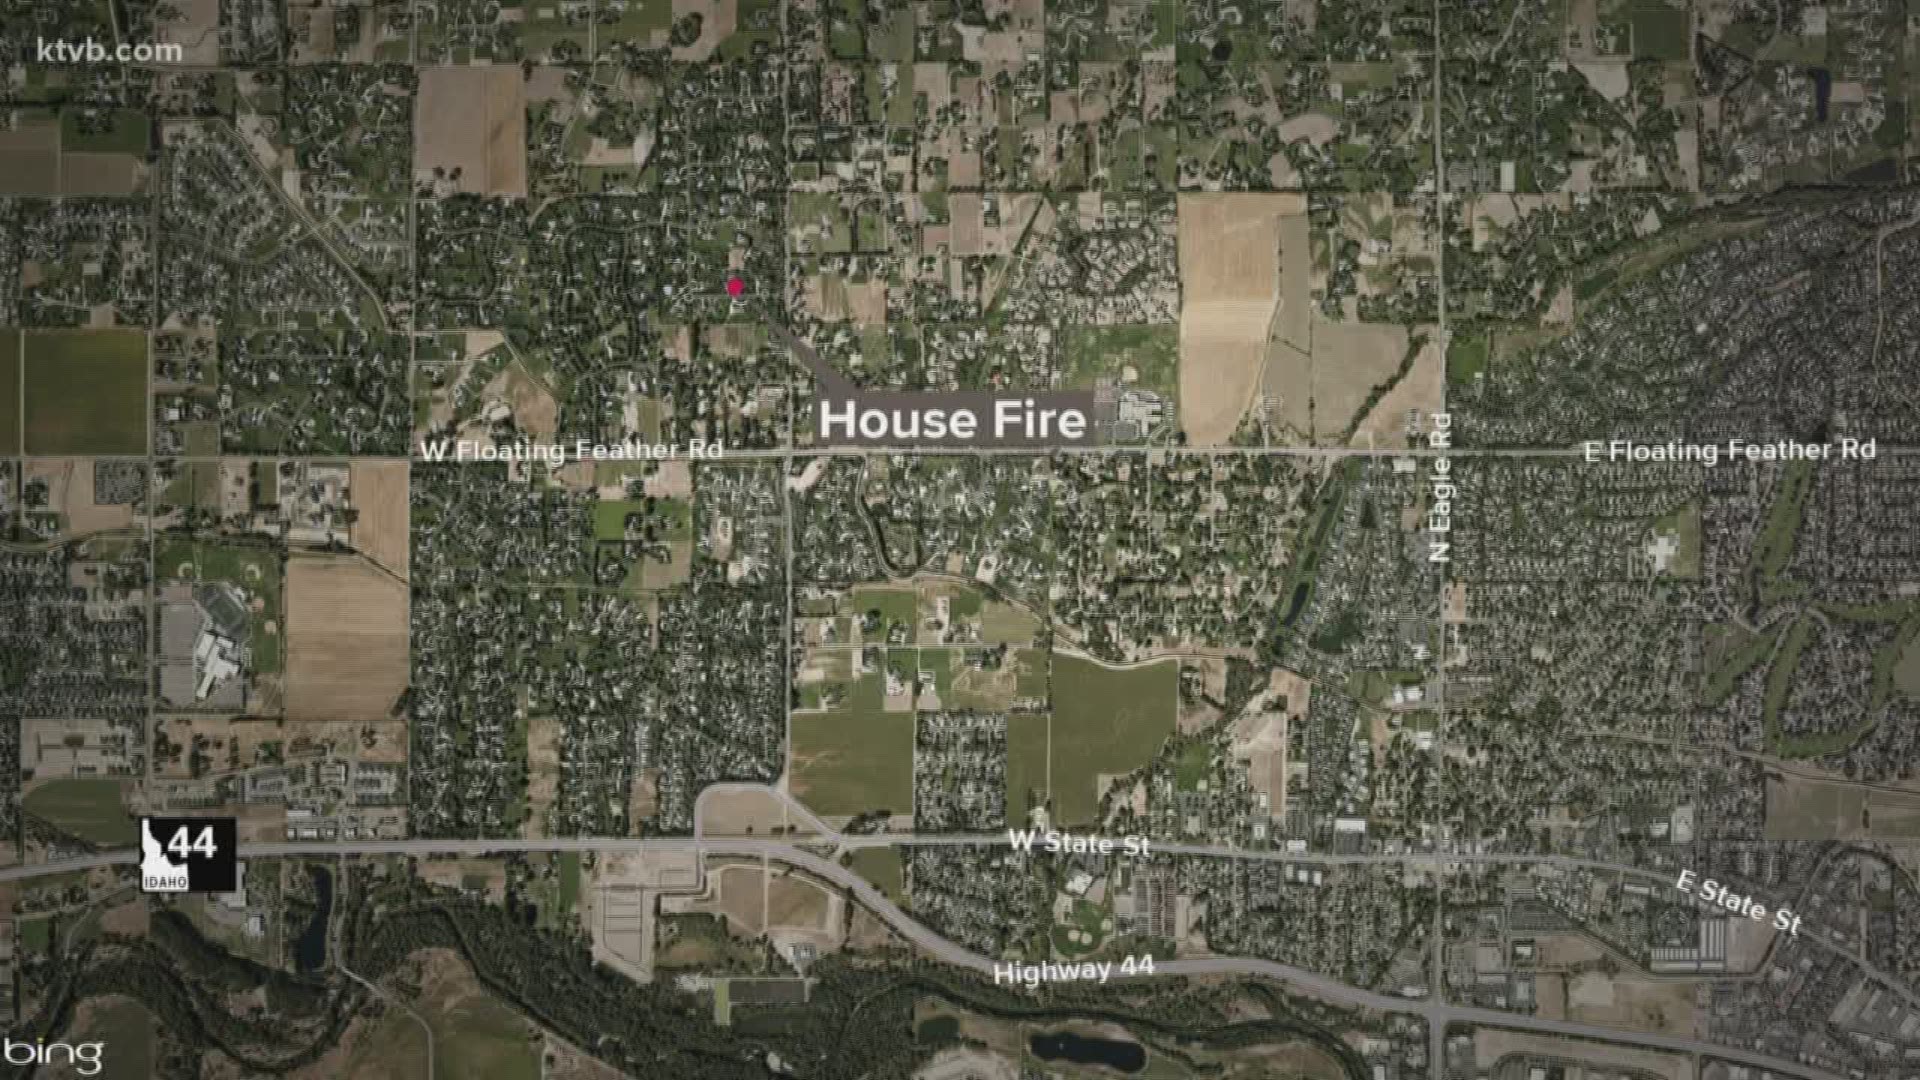 No one was injured in the fire, officials say.